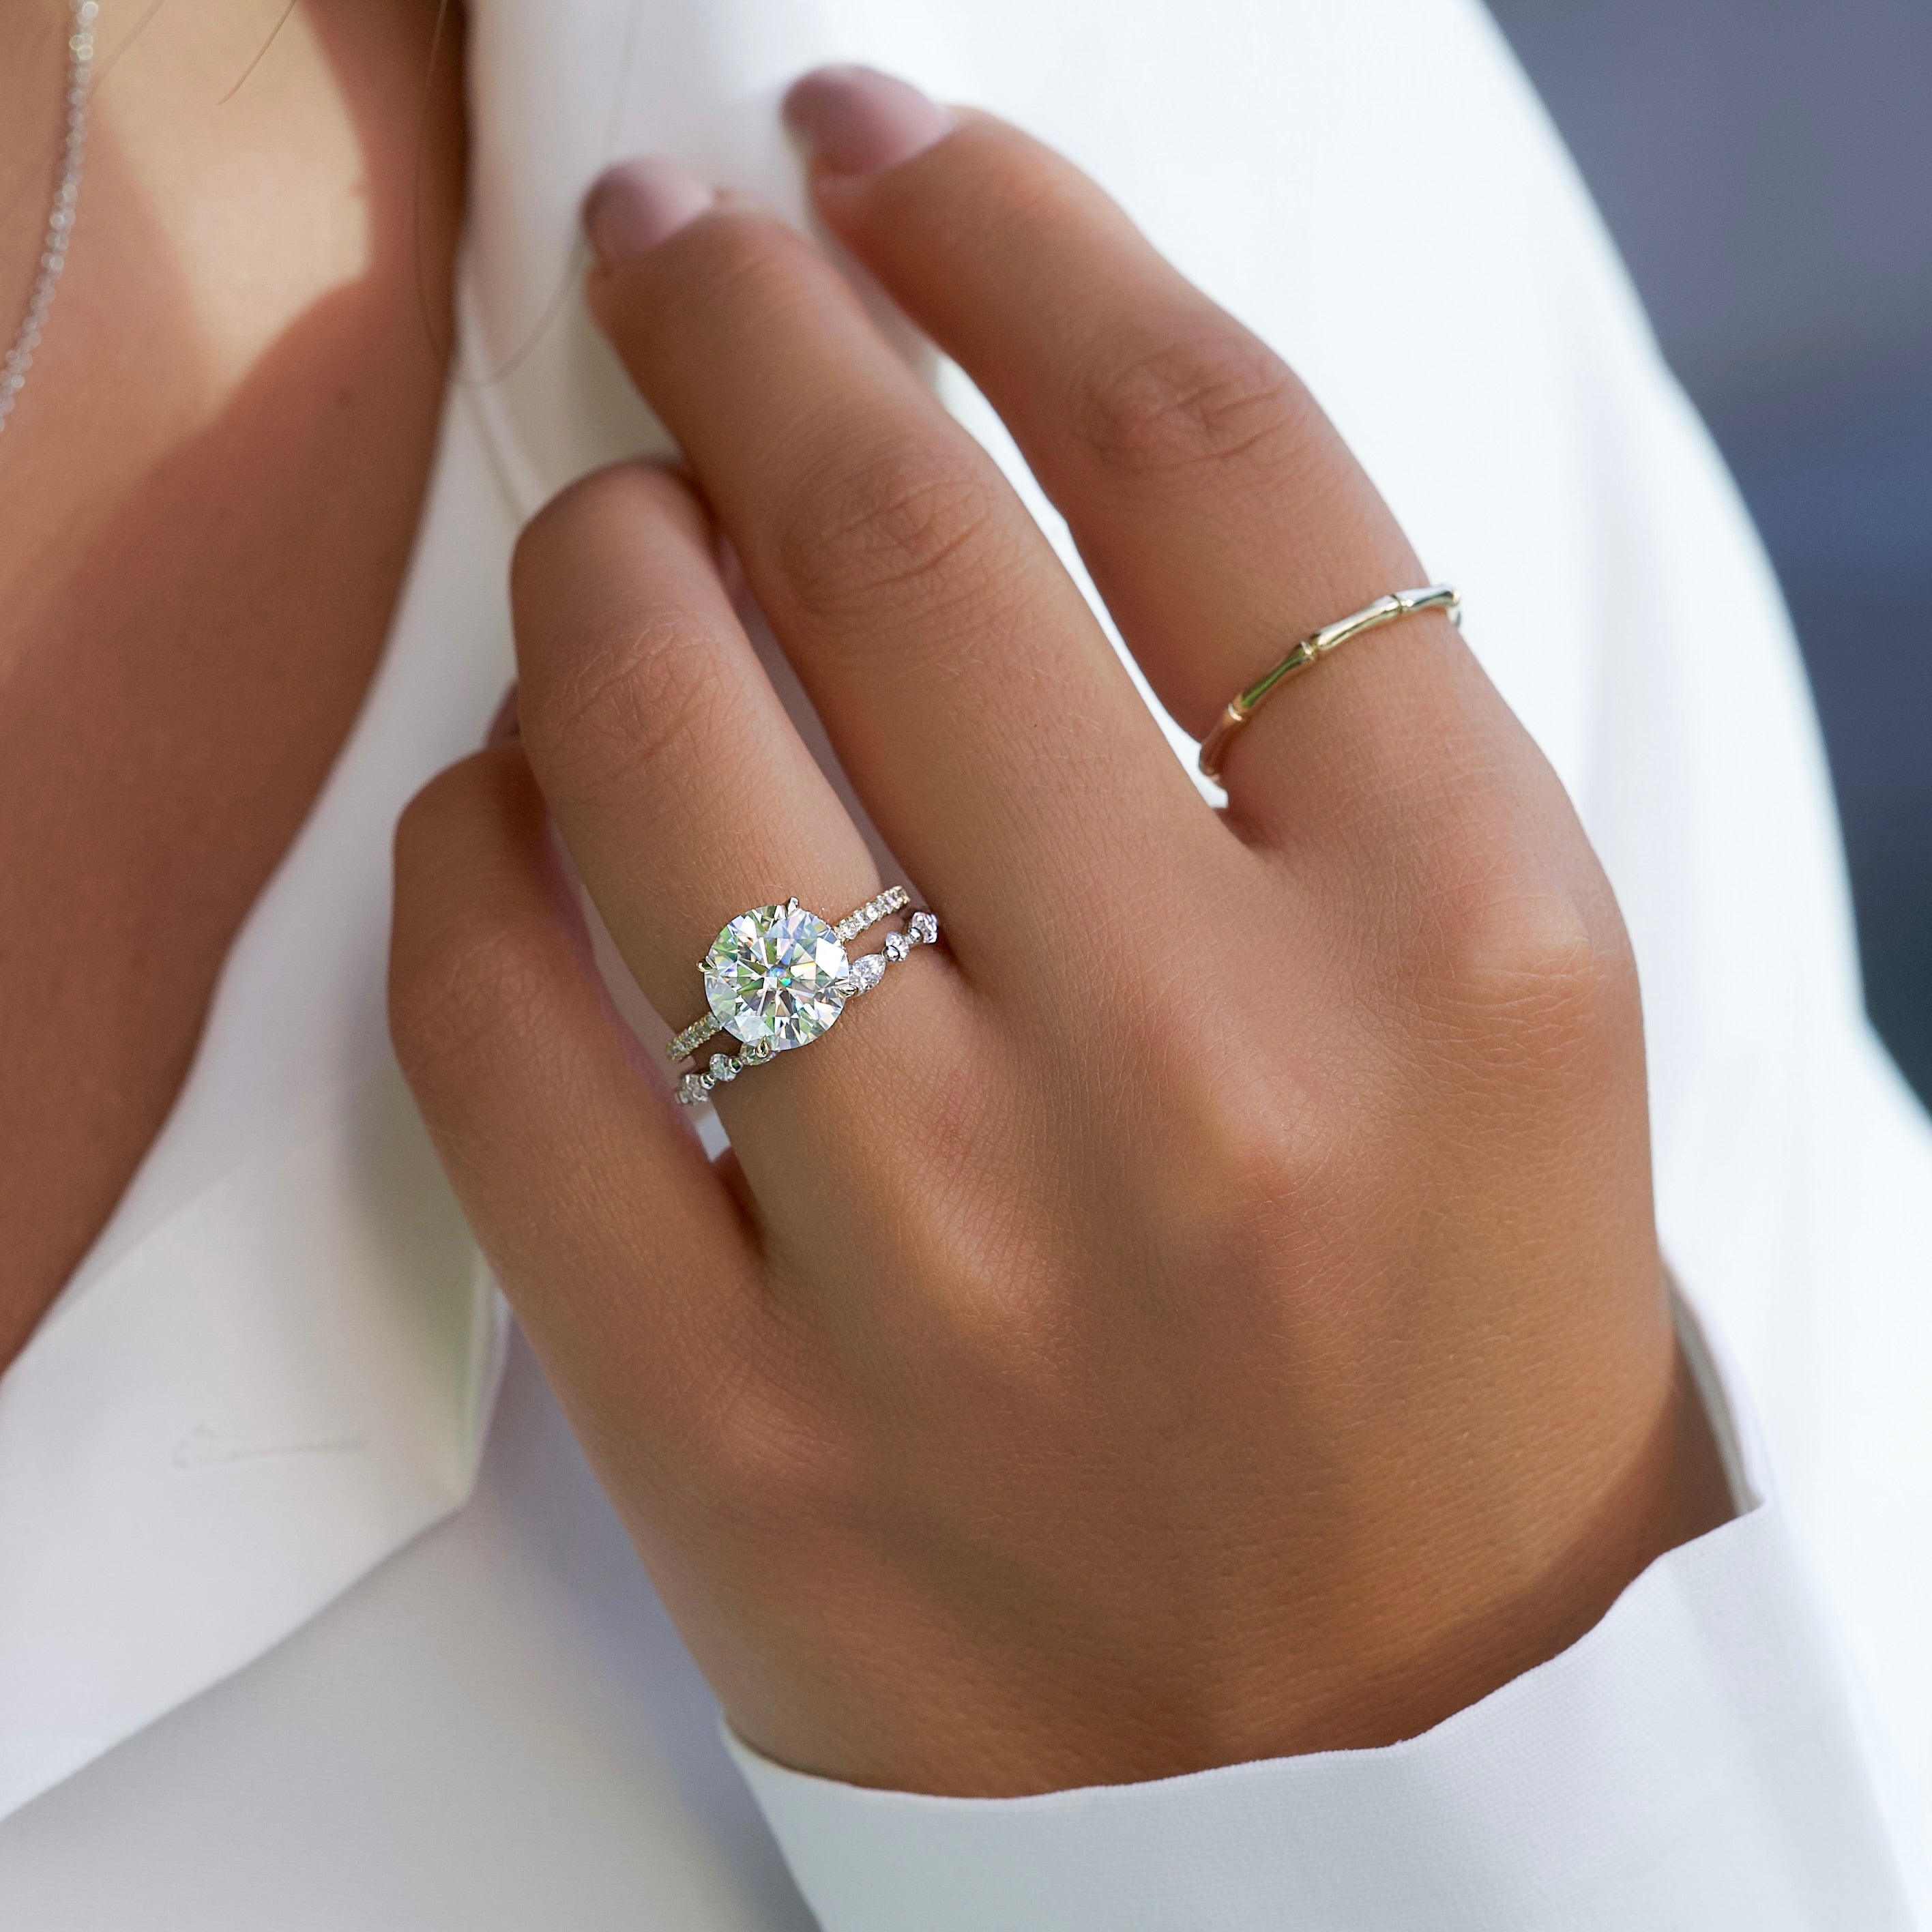 10 Reasons to Choose a Rose Gold Engagement or Wedding Ring